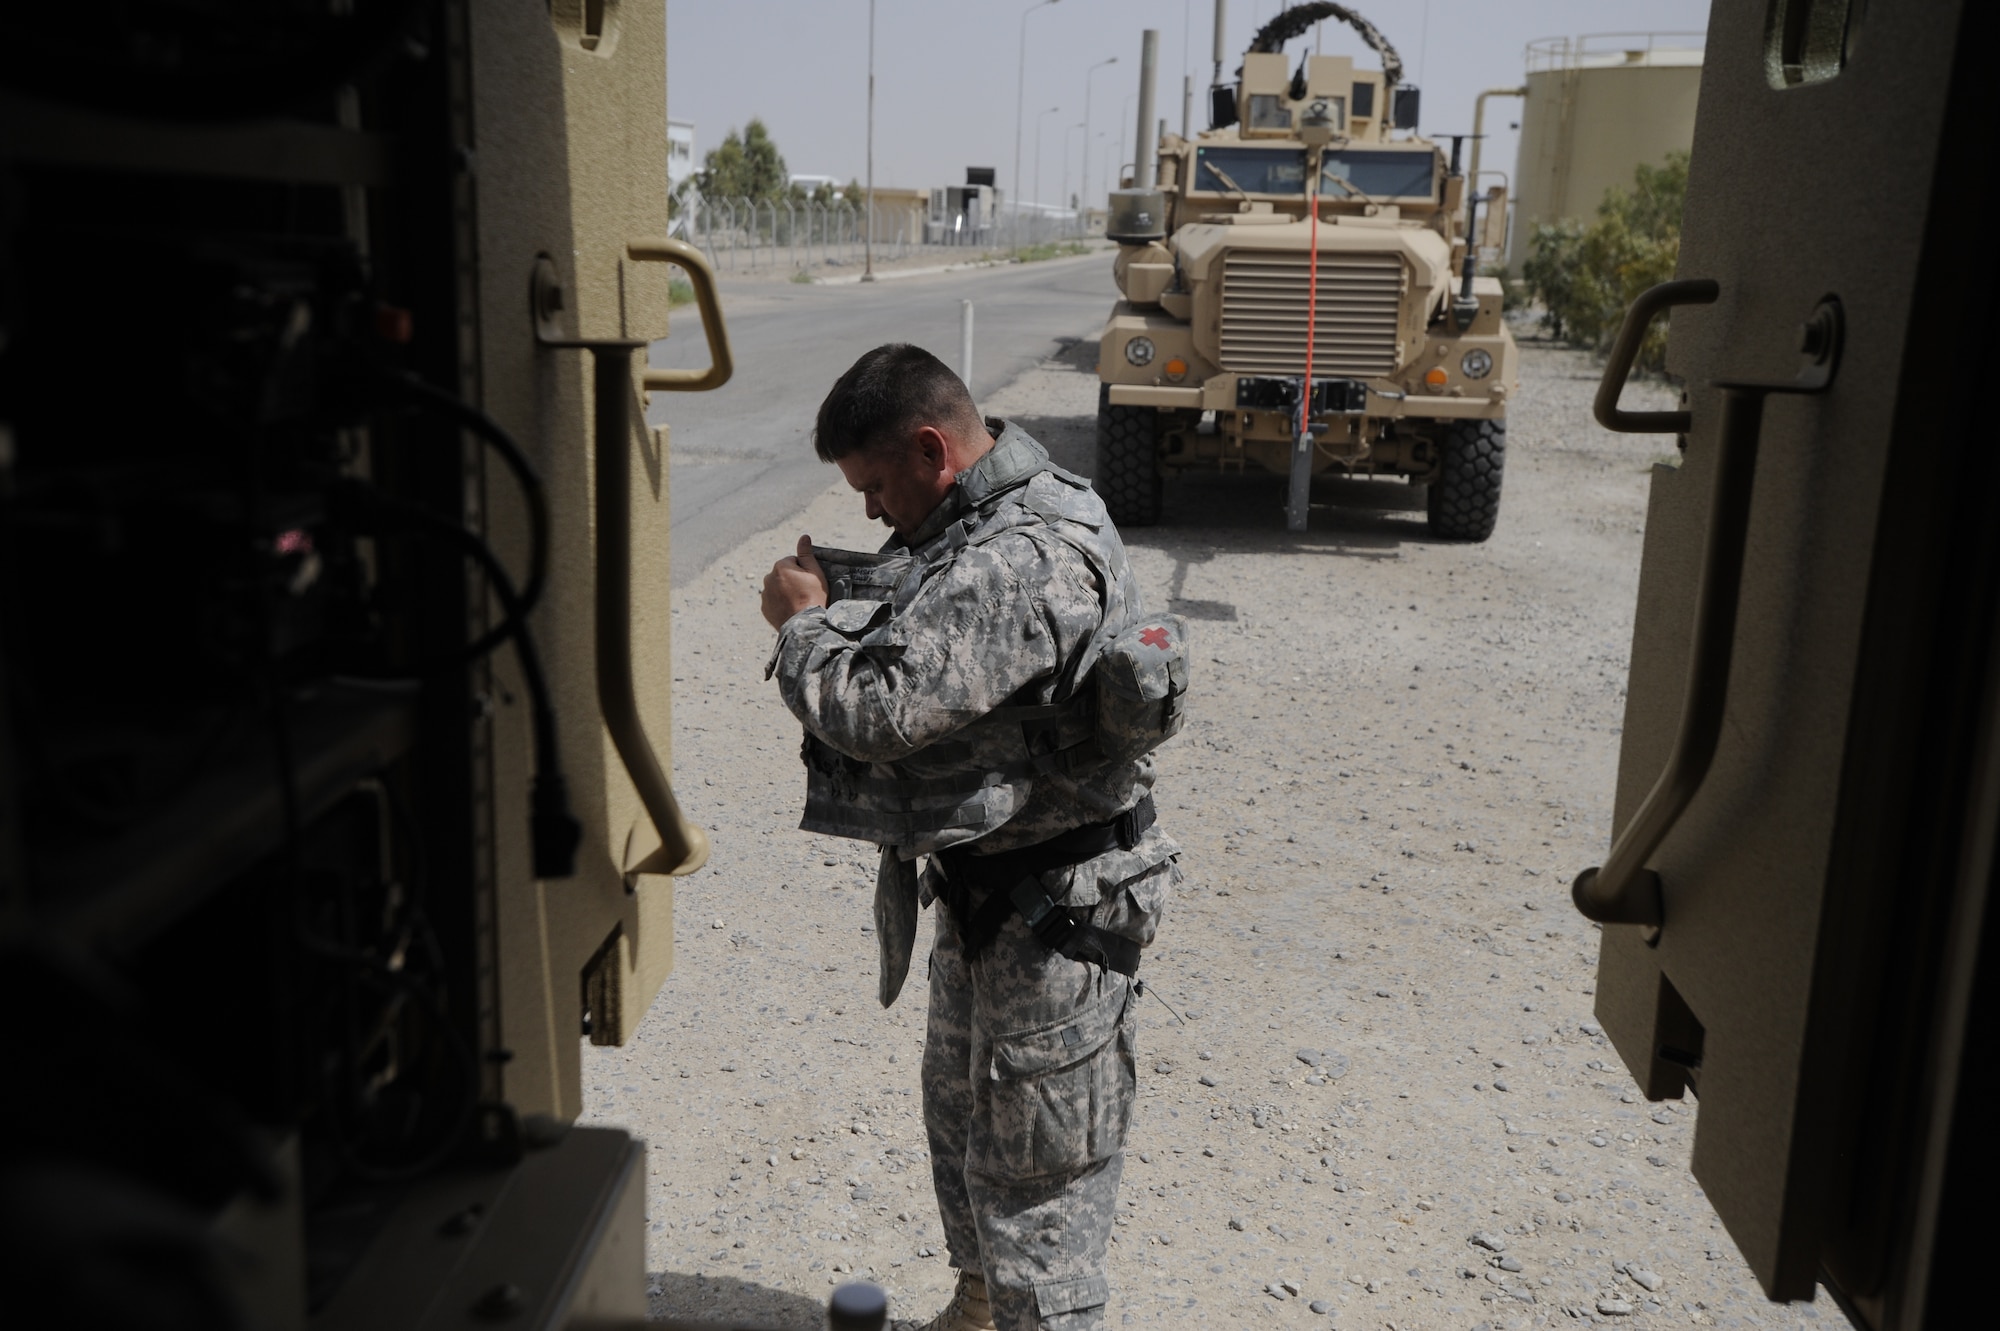 ALI BASE, Iraq - U.S. Air Force Lt. Col. Steven Ramsay, Tallil Logistics Military Advisory Team (LMAT) Senior Advisor, dons a harness in preparation for a convoy to Contingency Operating Base Adder, Iraq, from Camp Ur, an Iraqi military base Aug. 17, 2009.  Colonel Ramsay, deployed from Keesler Air Force Base, Miss., and his team advise their Iraqi military counterparts on base operations. (U.S. Air Force photo / Staff Sgt. Shawn Weismiller )